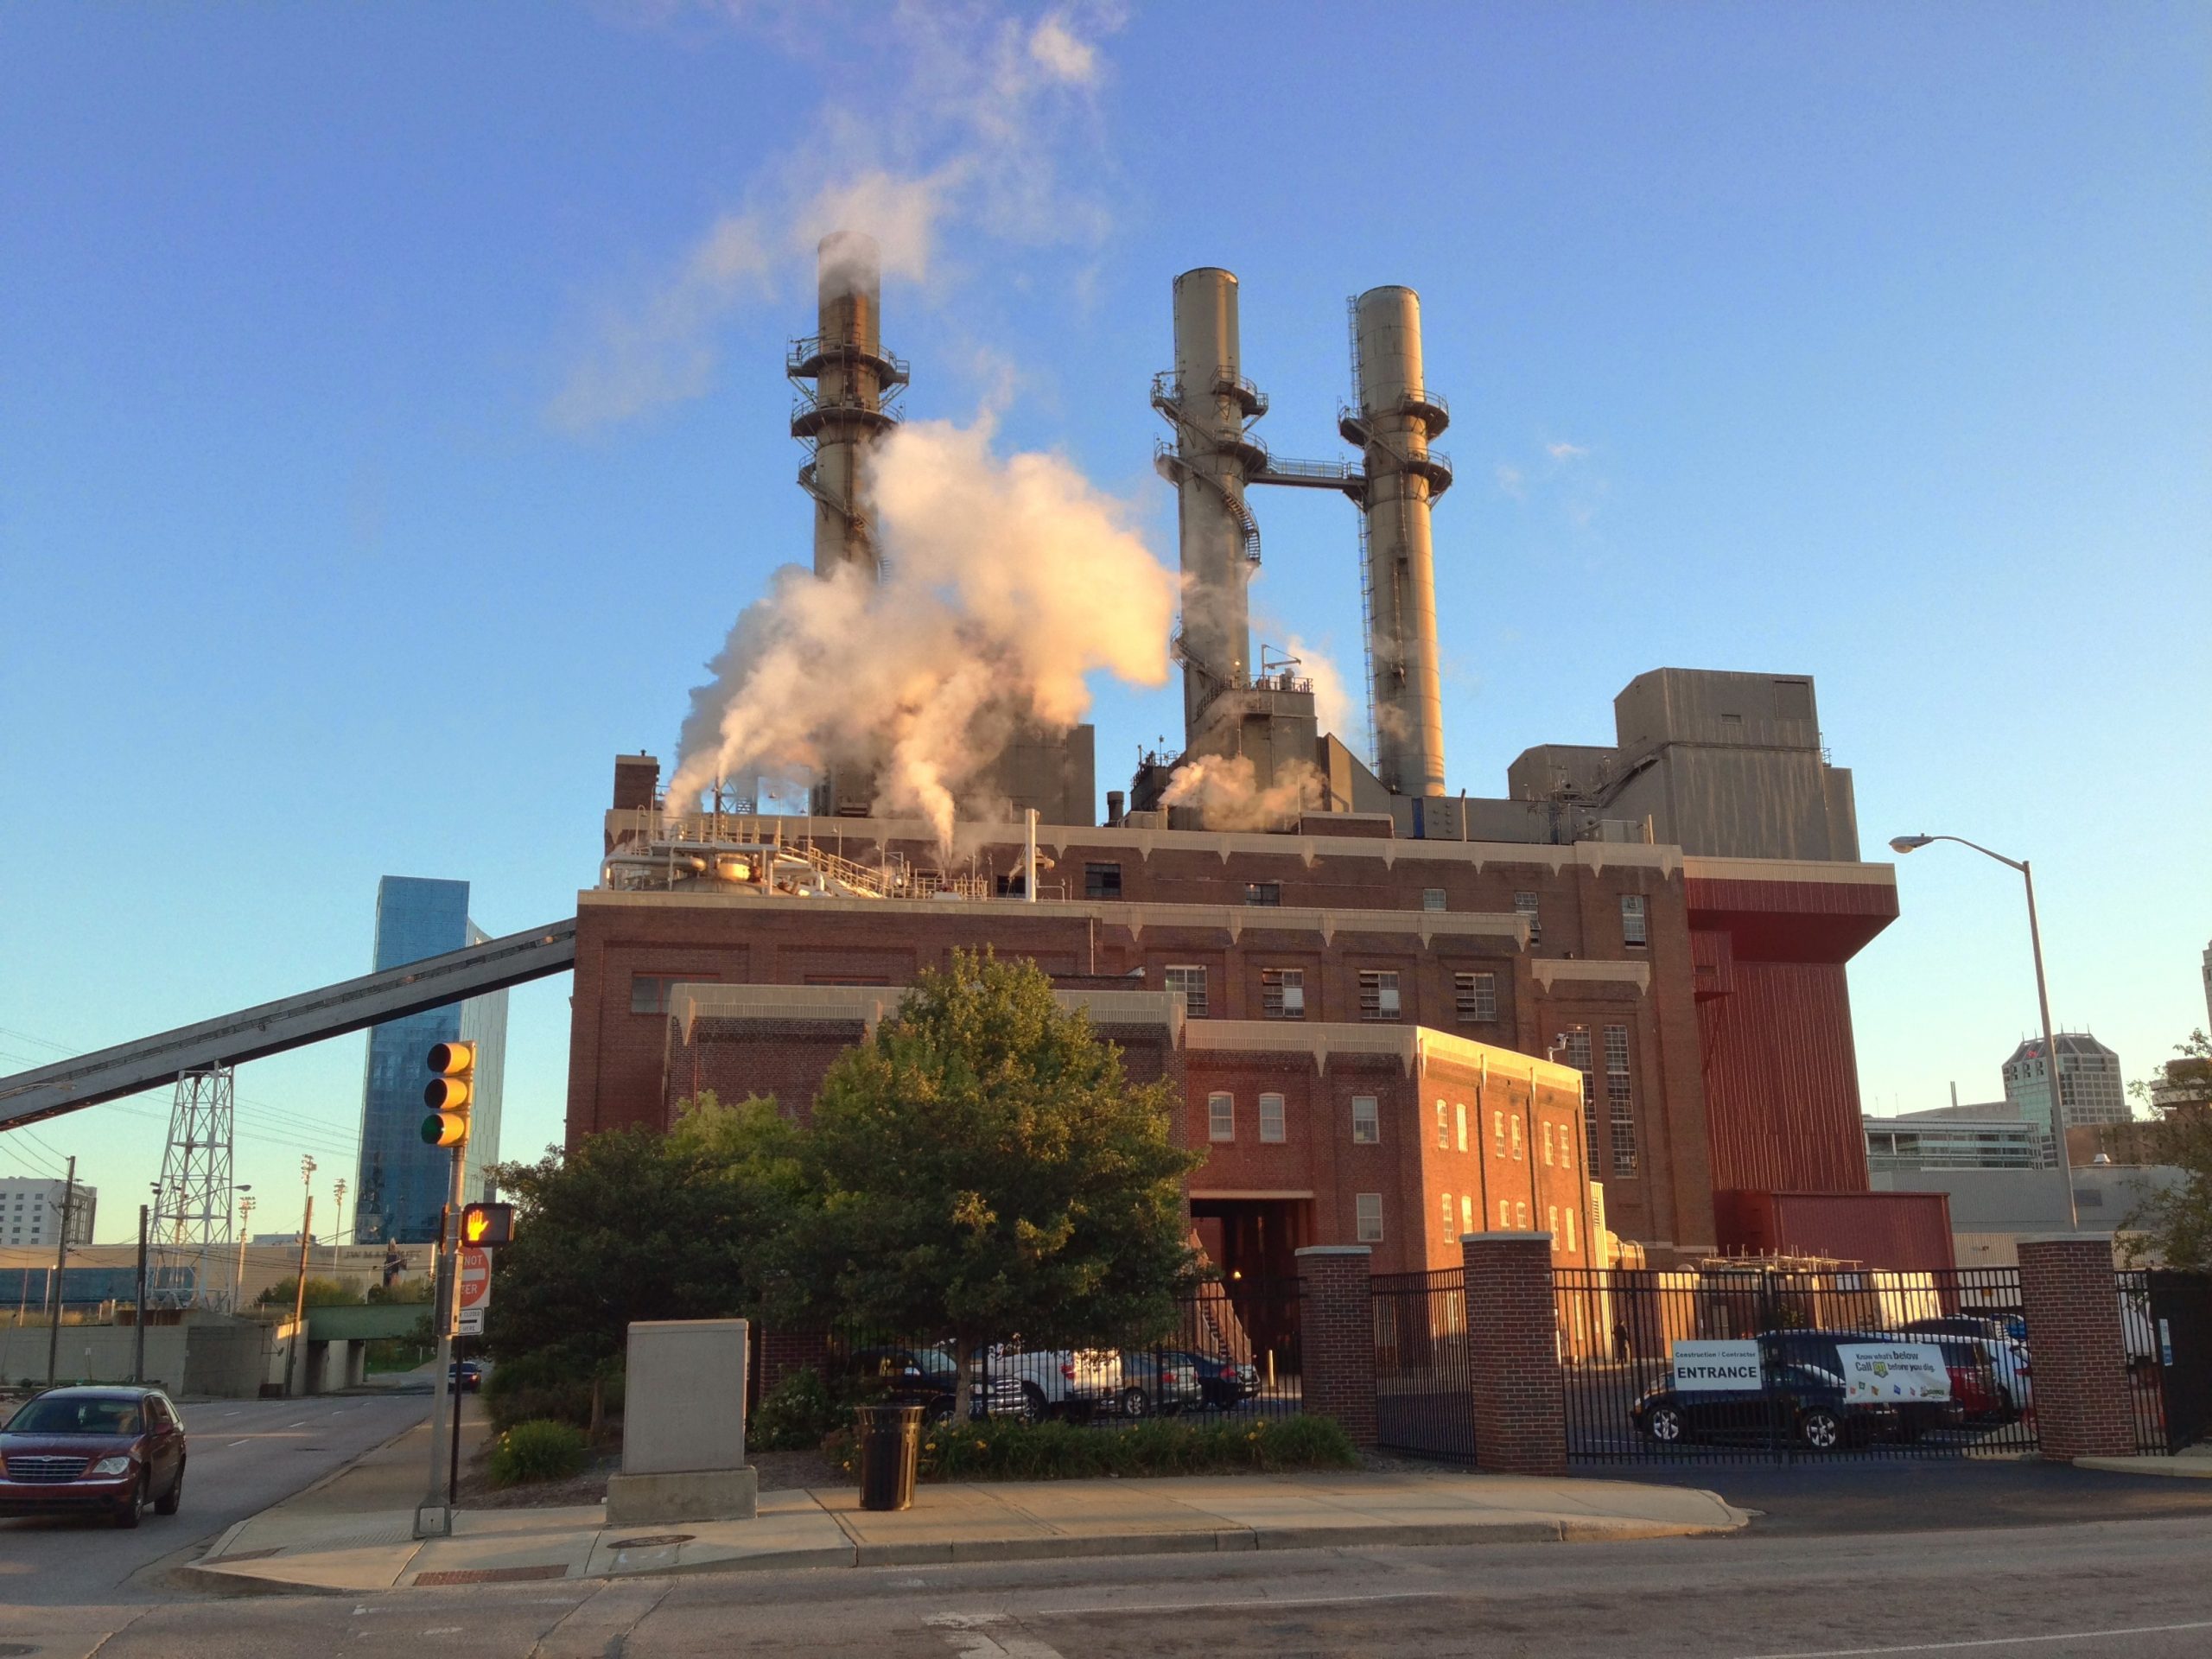 Exterior view of a large generating station with three smoke stacks. 